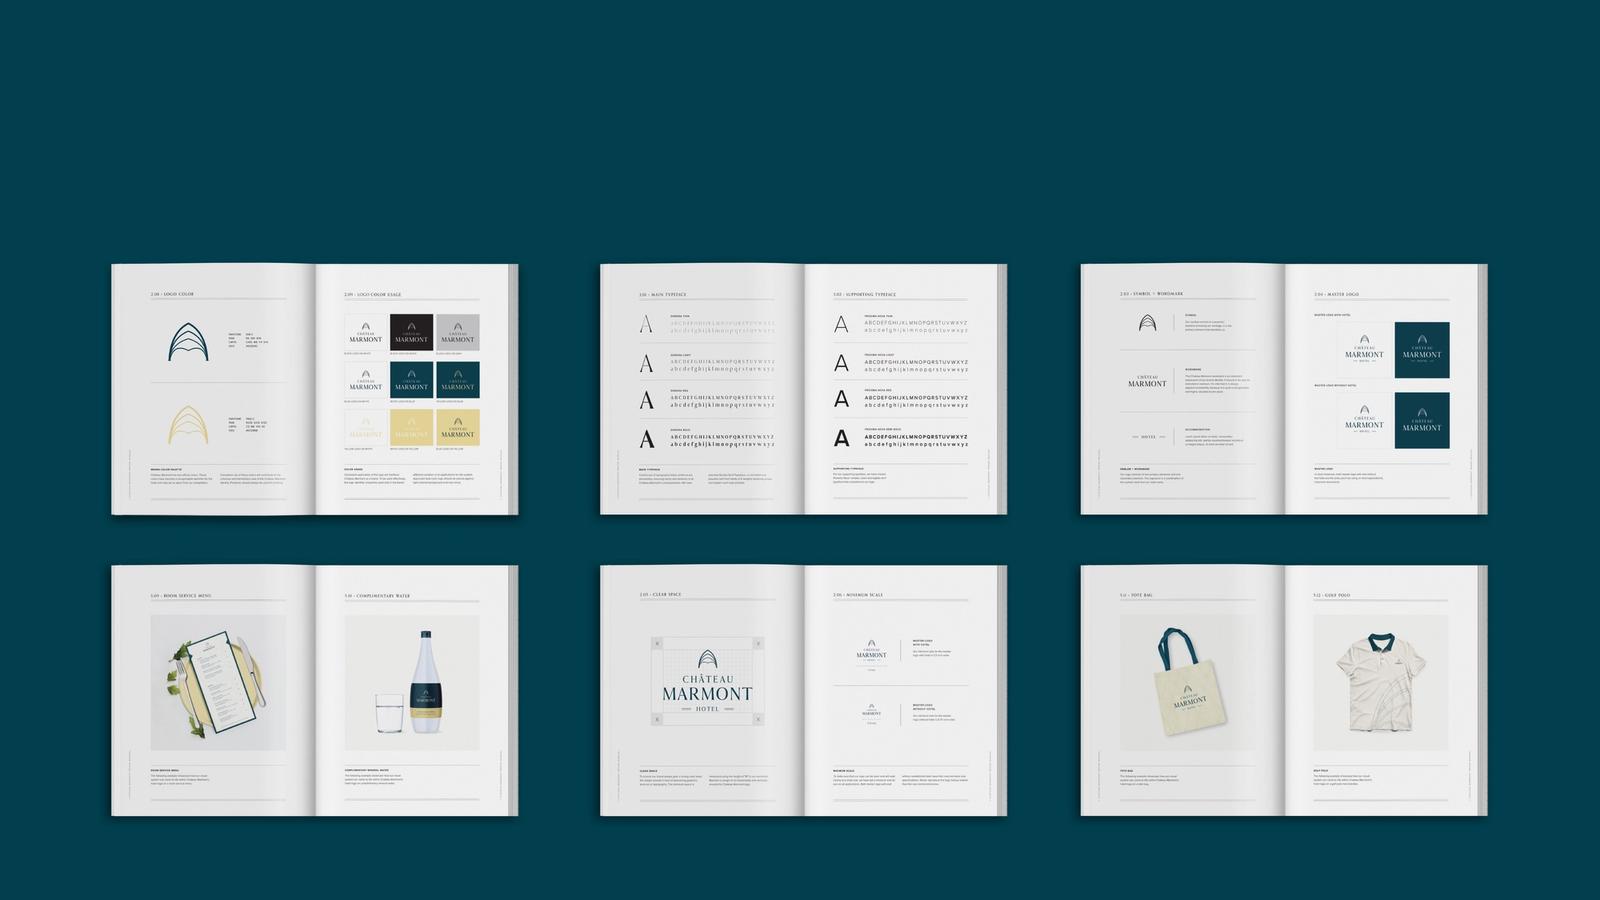 Chateau Marmont // Branding Guidelines